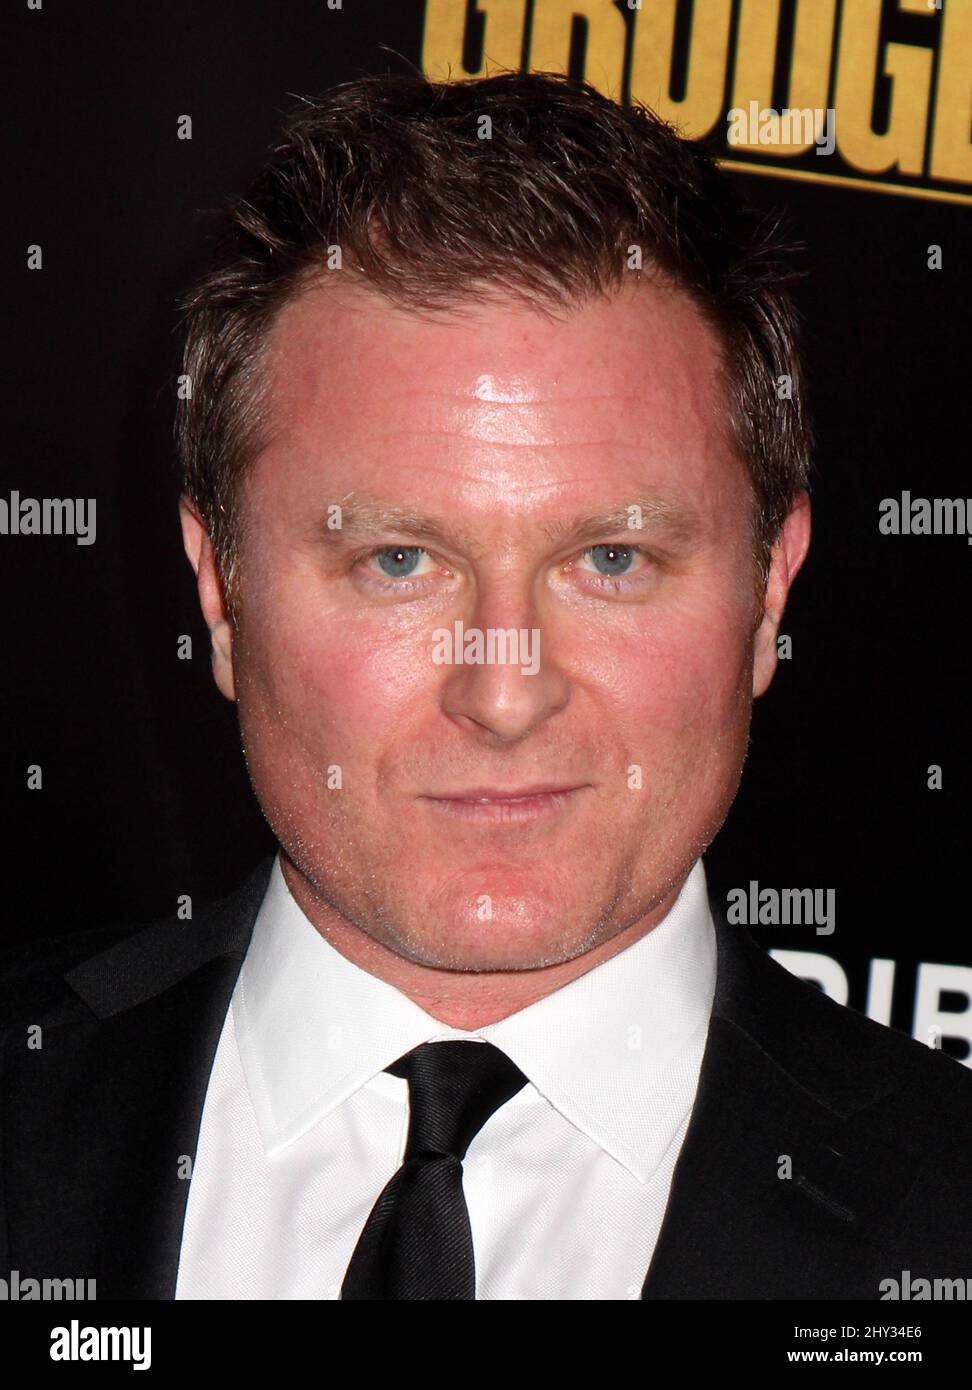 Todd Truly attending the premiere of 'Grudge Match' at the Ziegfeld Theater in New York City. Stock Photo